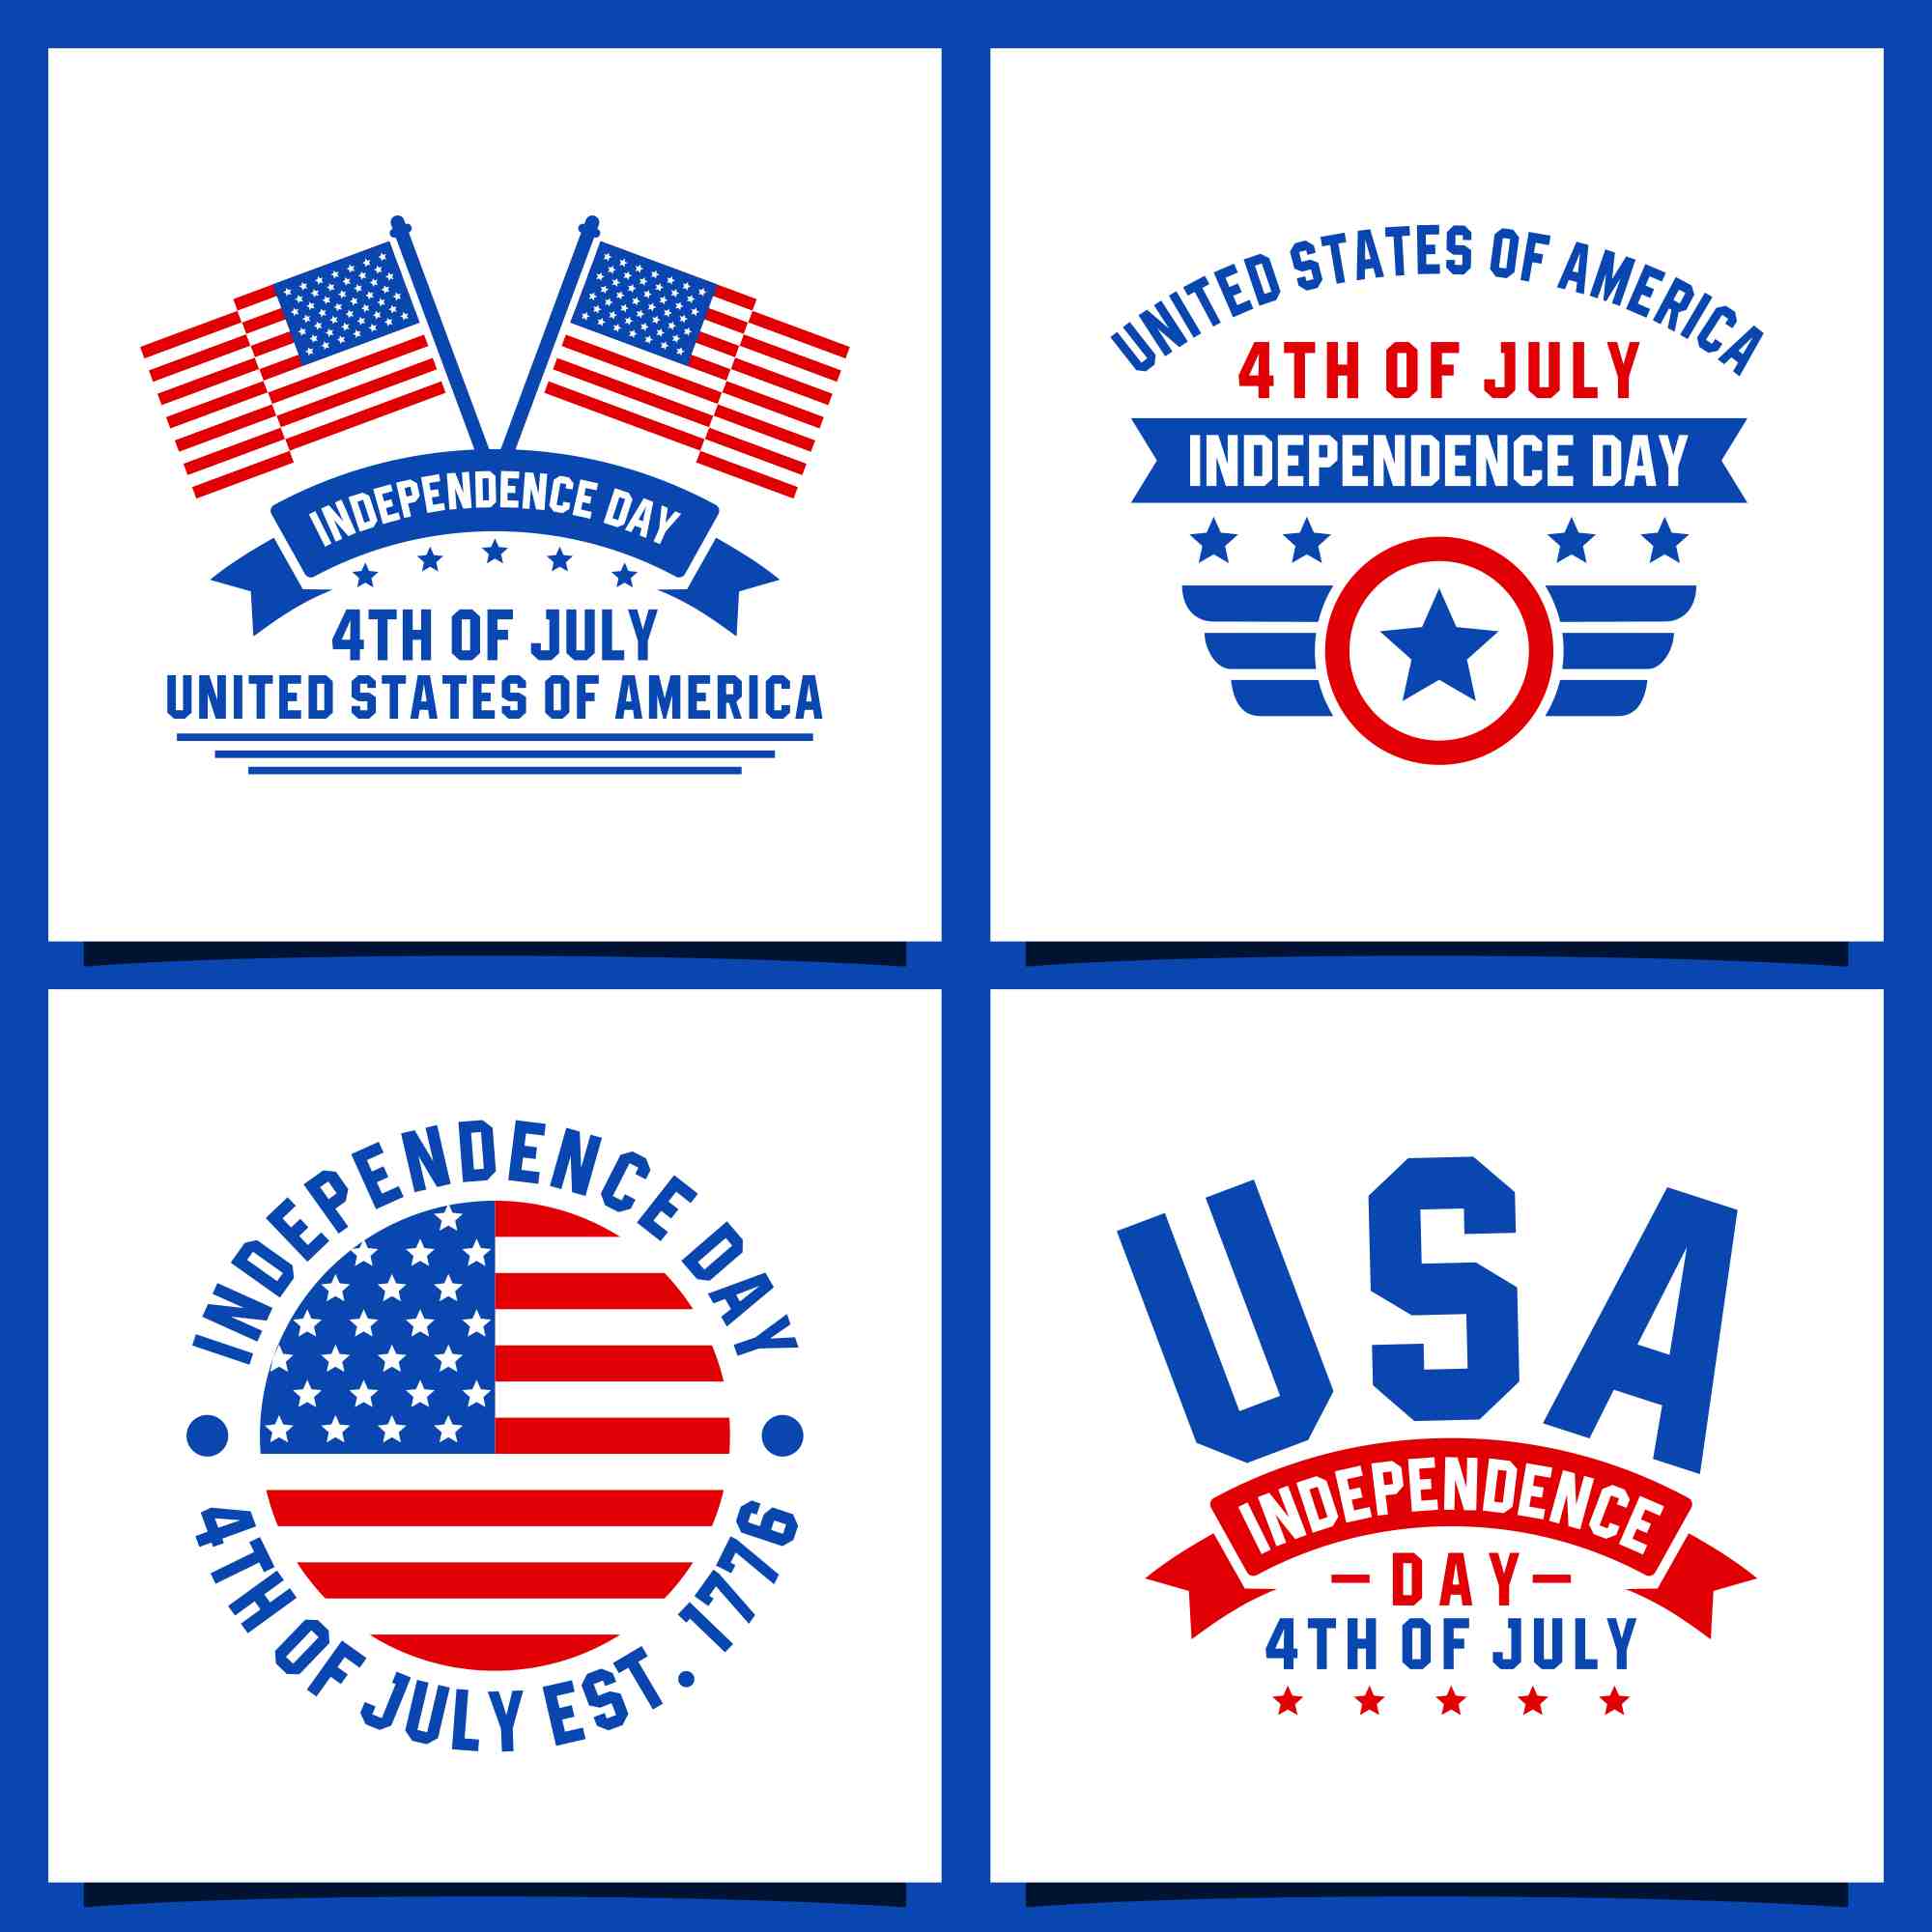 18 Independence Day 4 th July united states of america design collection - $12 preview image.